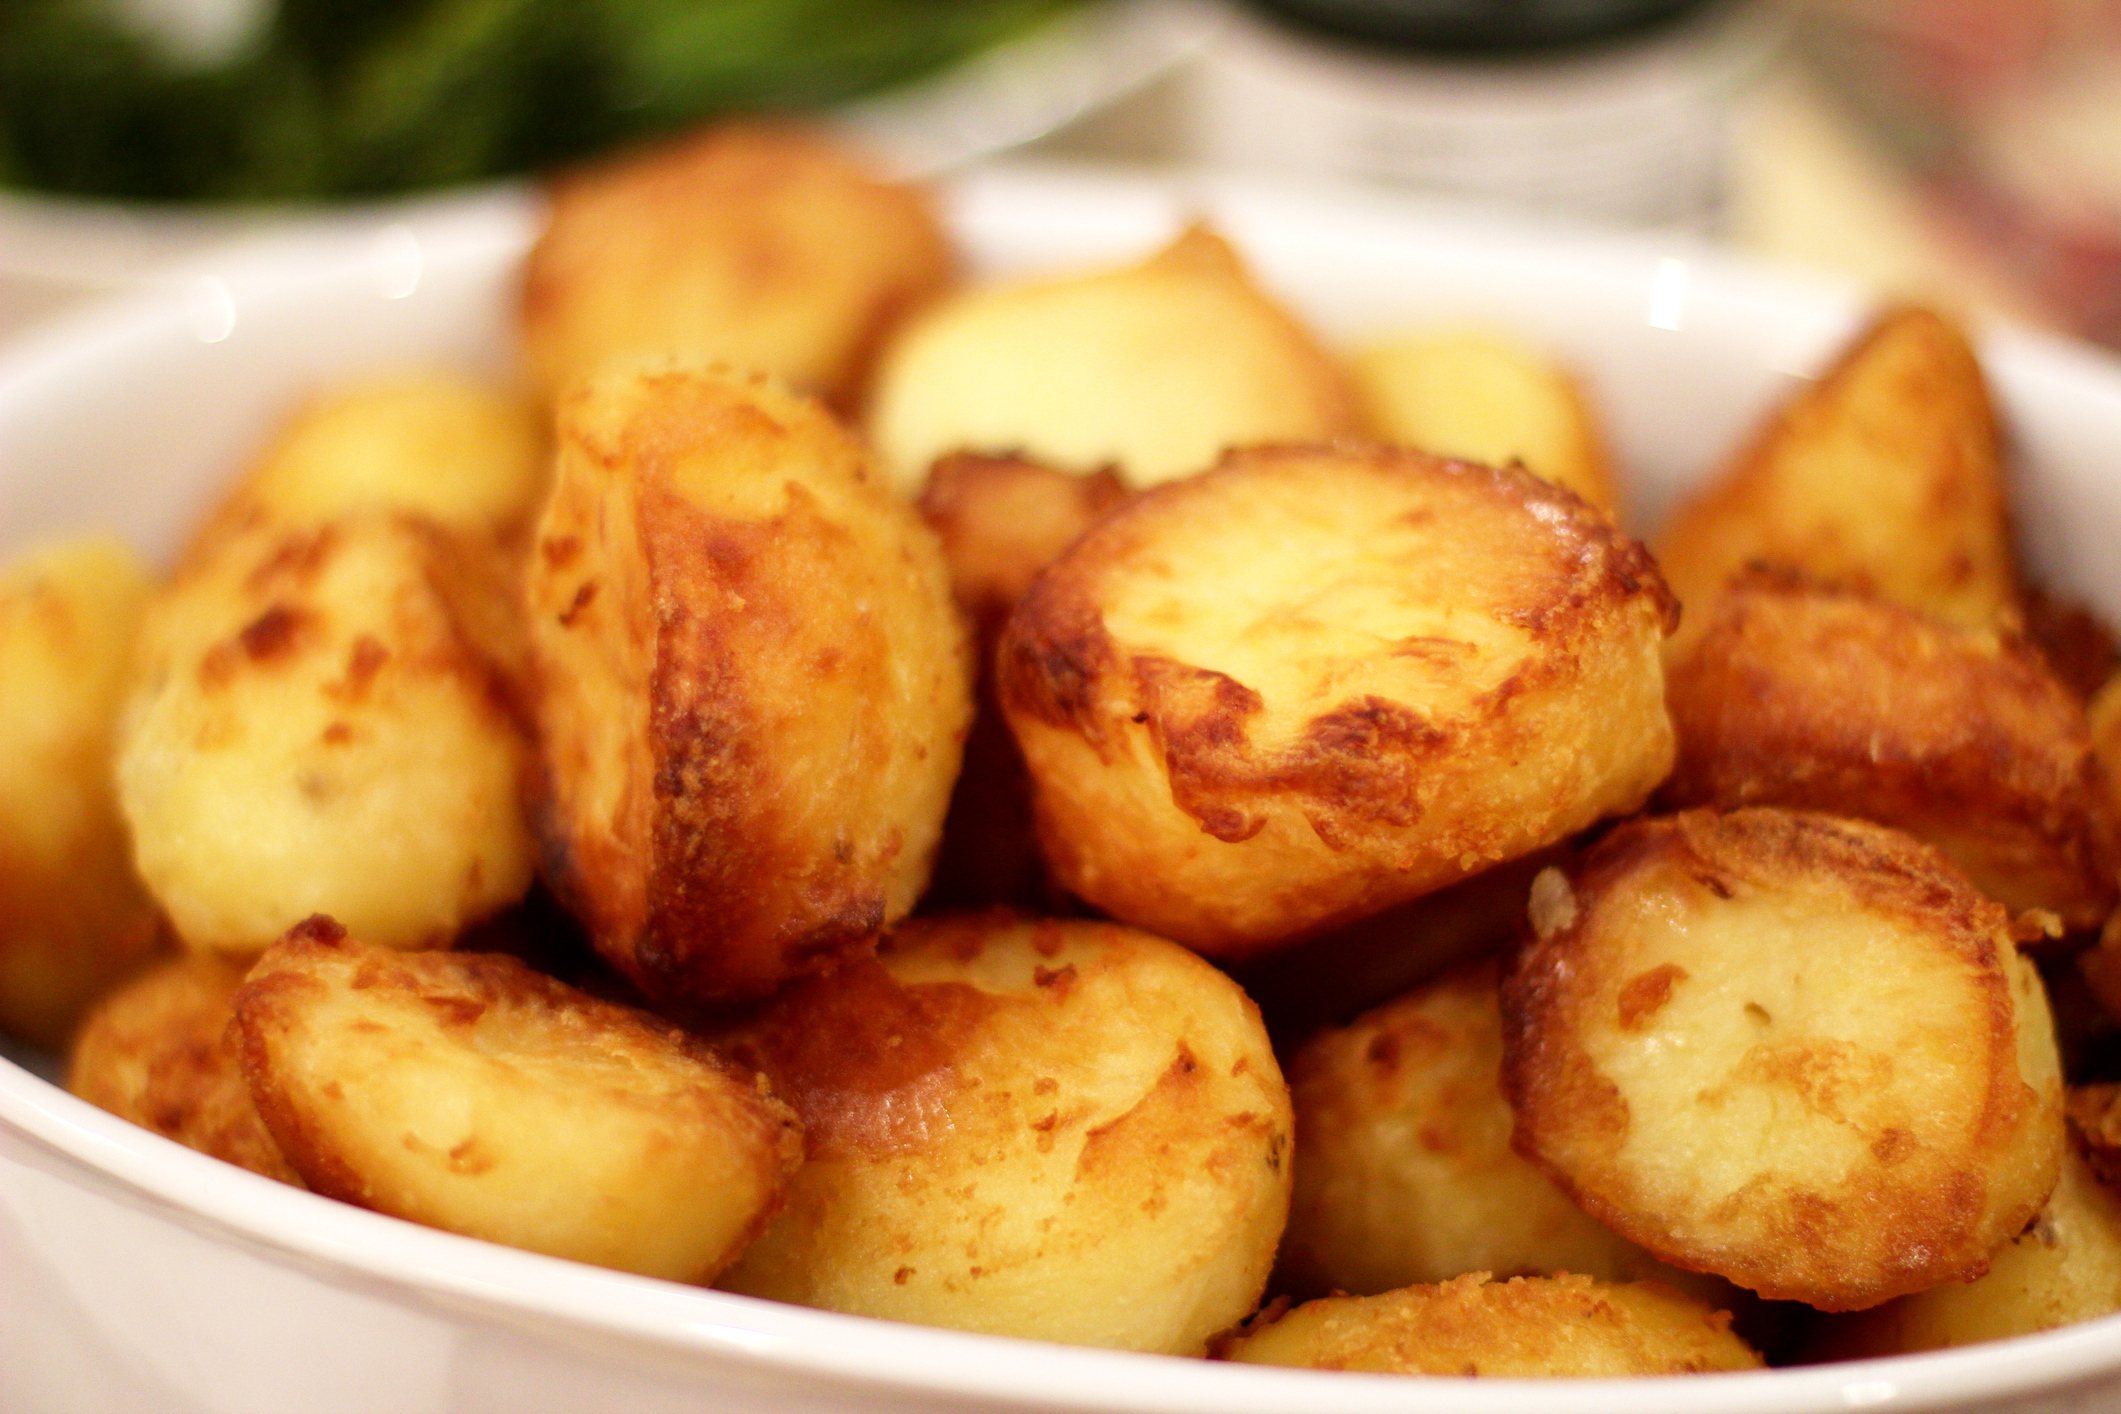 The One Ingredient You Need for Perfectly Roasted Potatoes Is Duck Fat